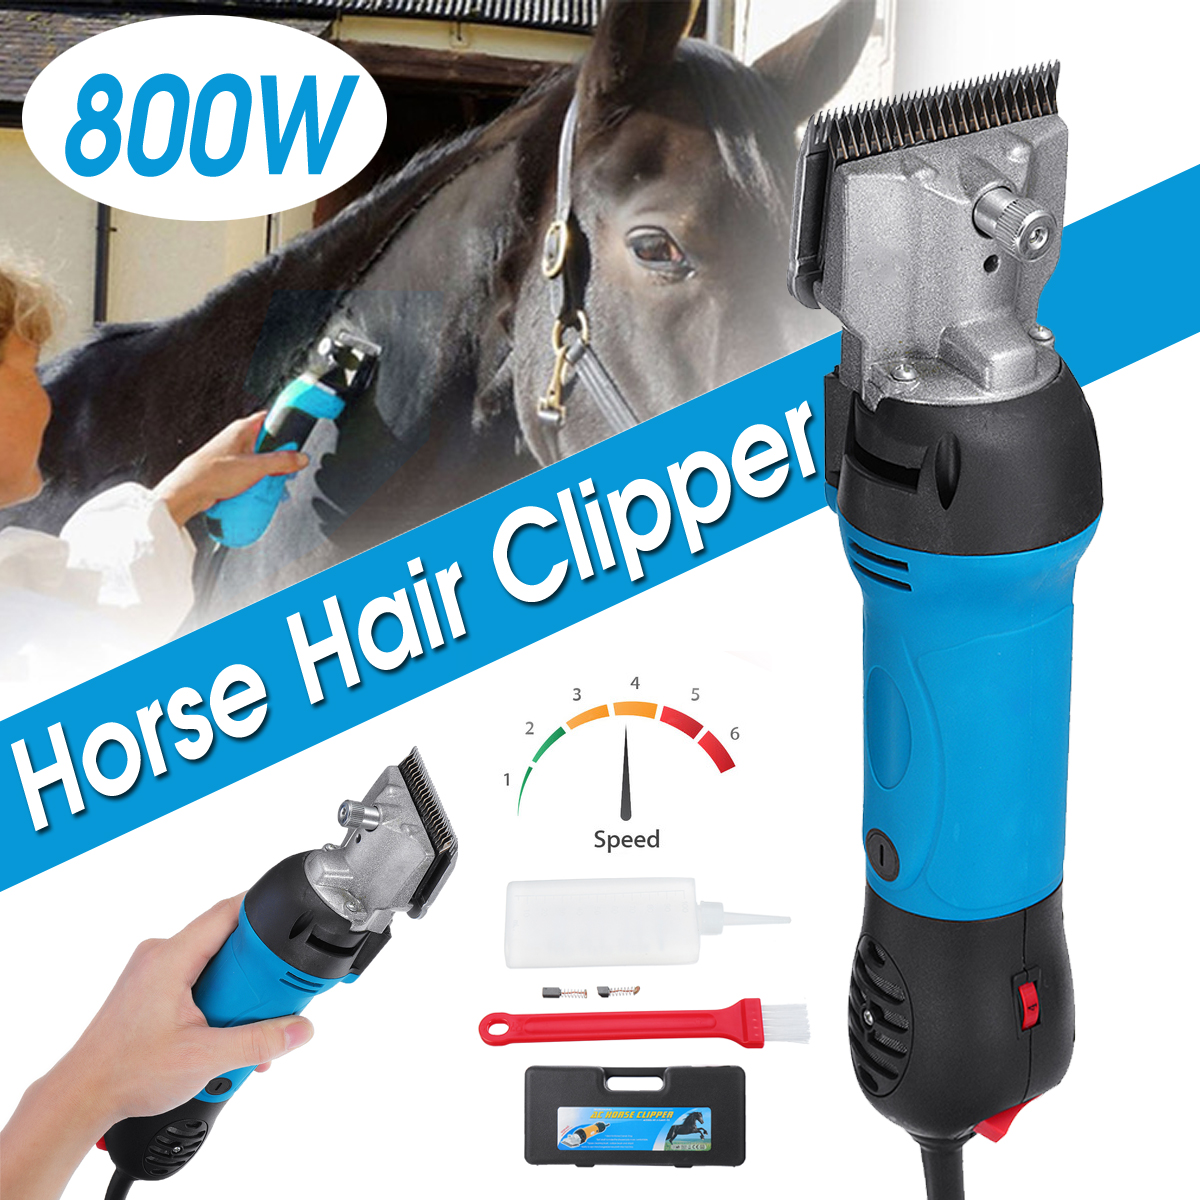 Heavy-Duty-Electric-Horse-Hair-Clipper-Multi-used-Farm-Shearing-Trimmer-Shaver-6-Speed-Regulated-She-1441907-2